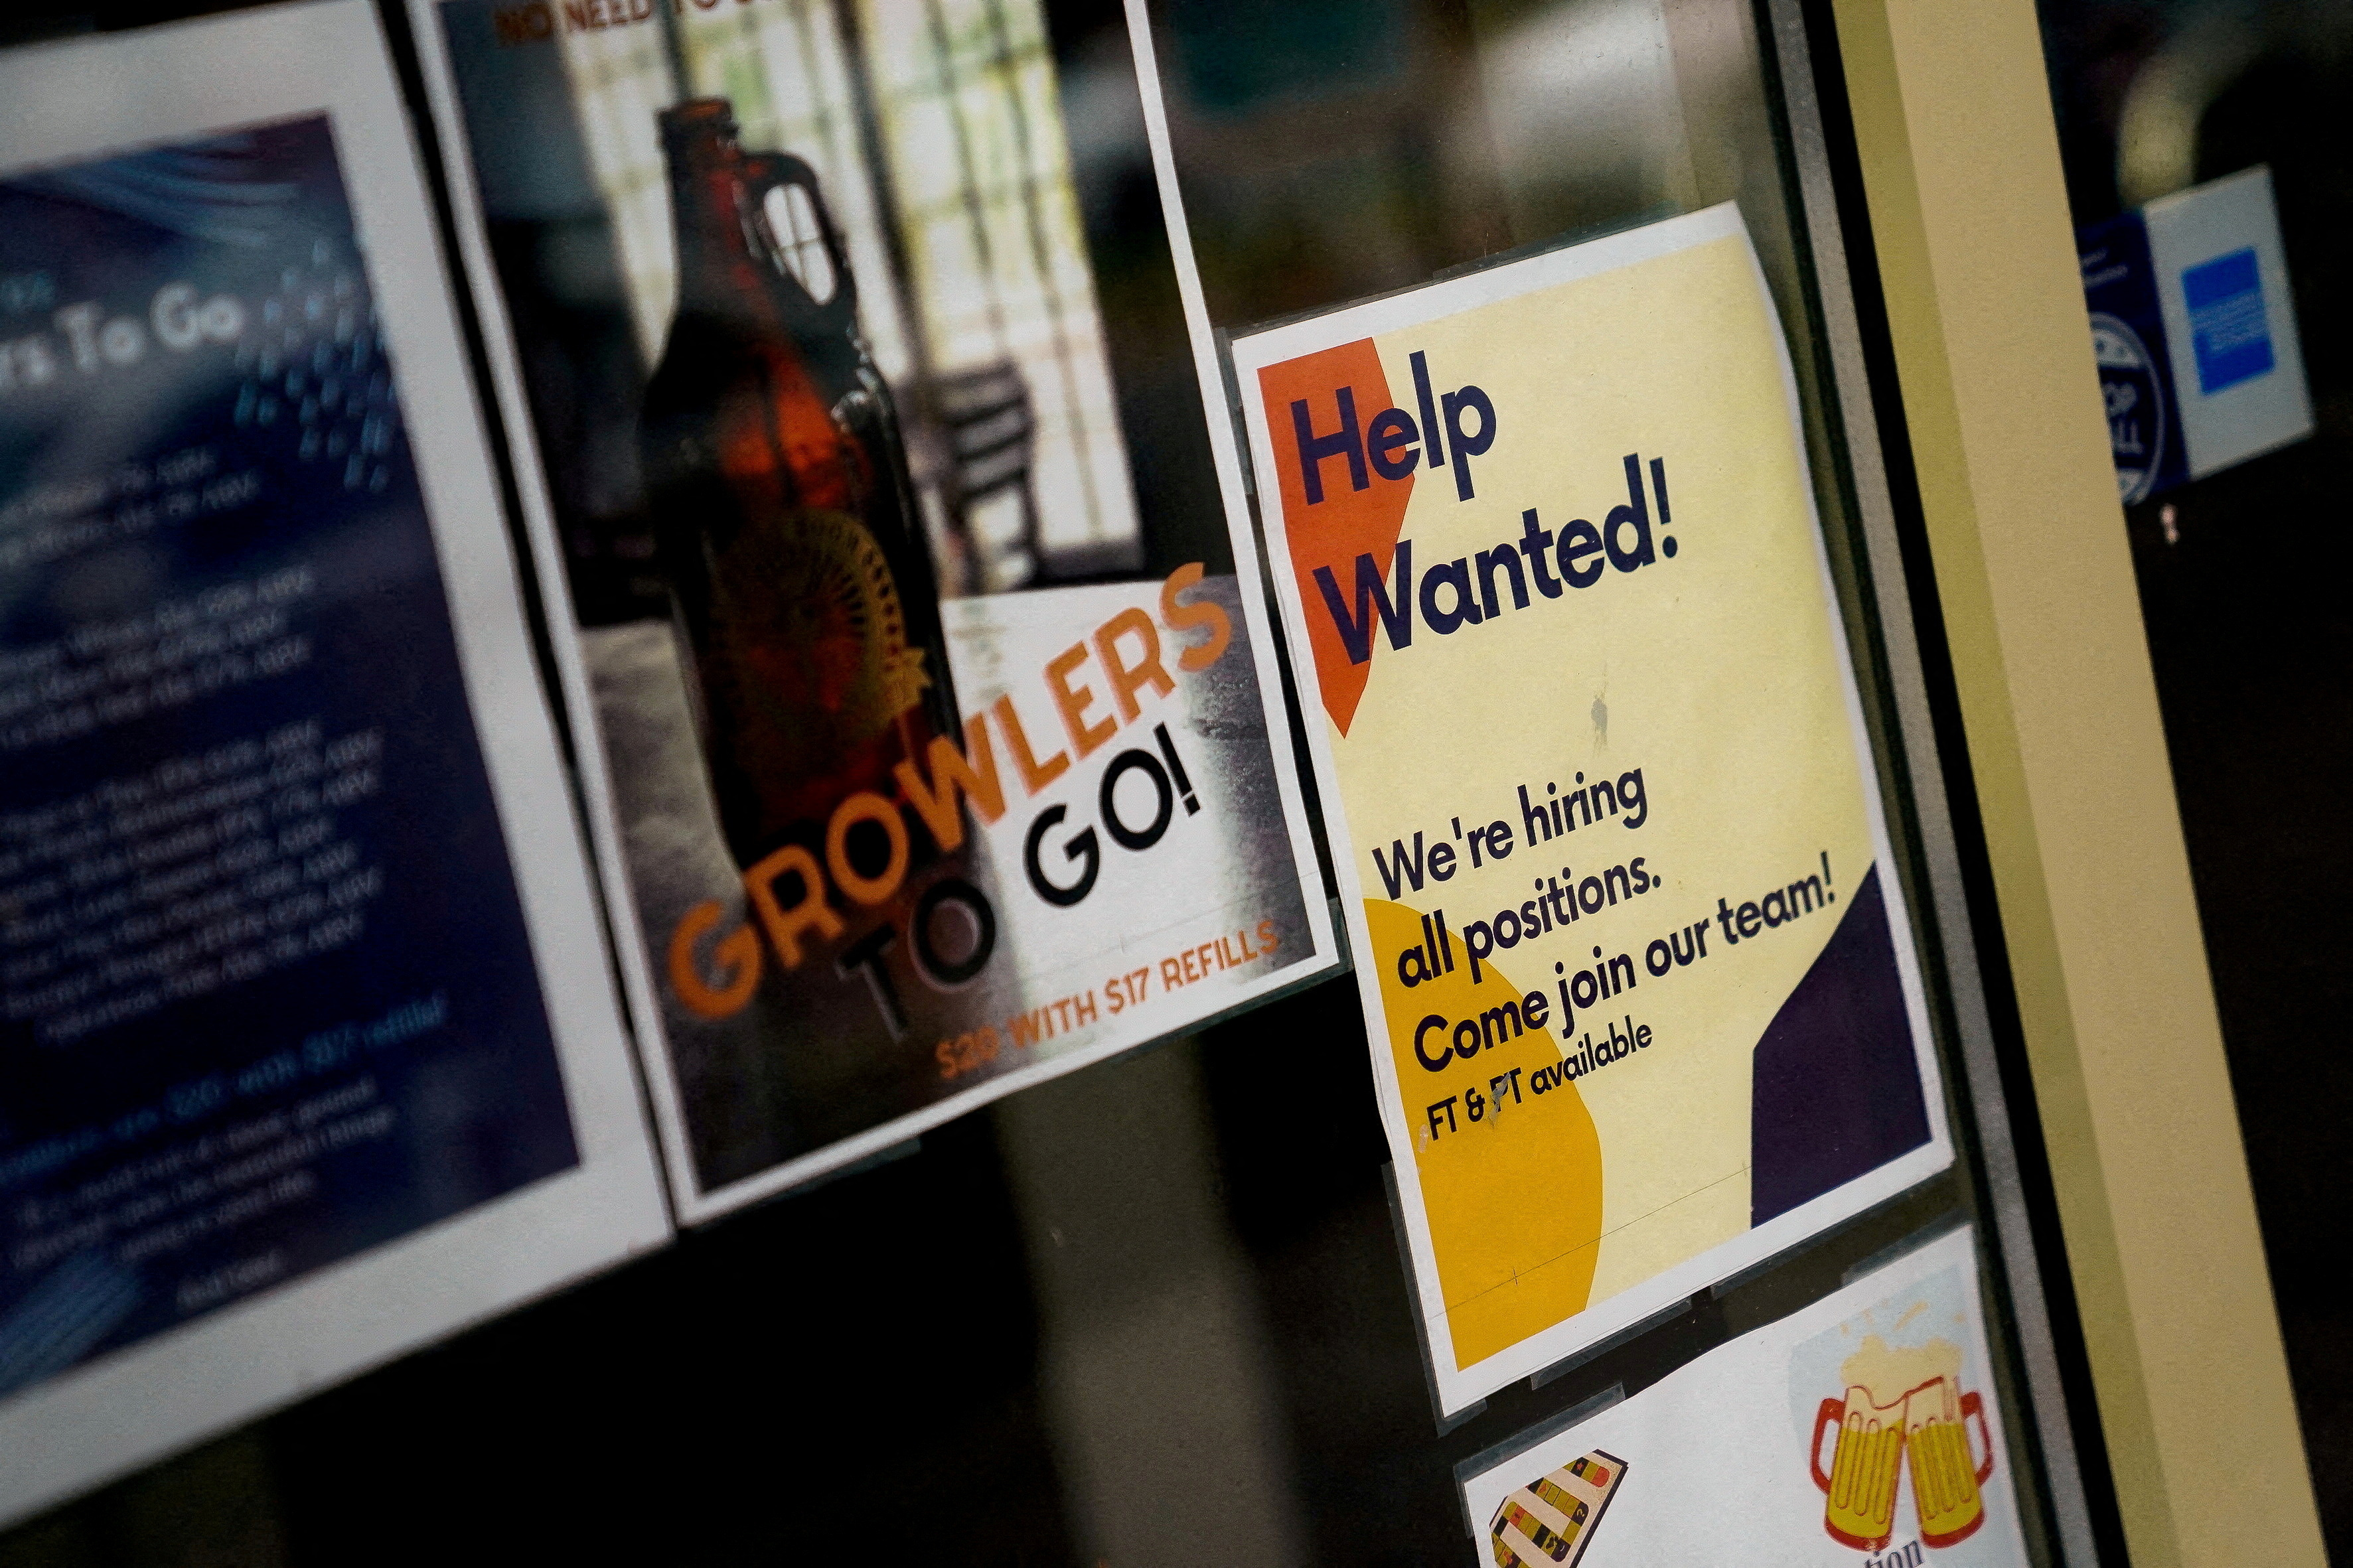 An employee hiring sign is seen in a window of a business in Arlington